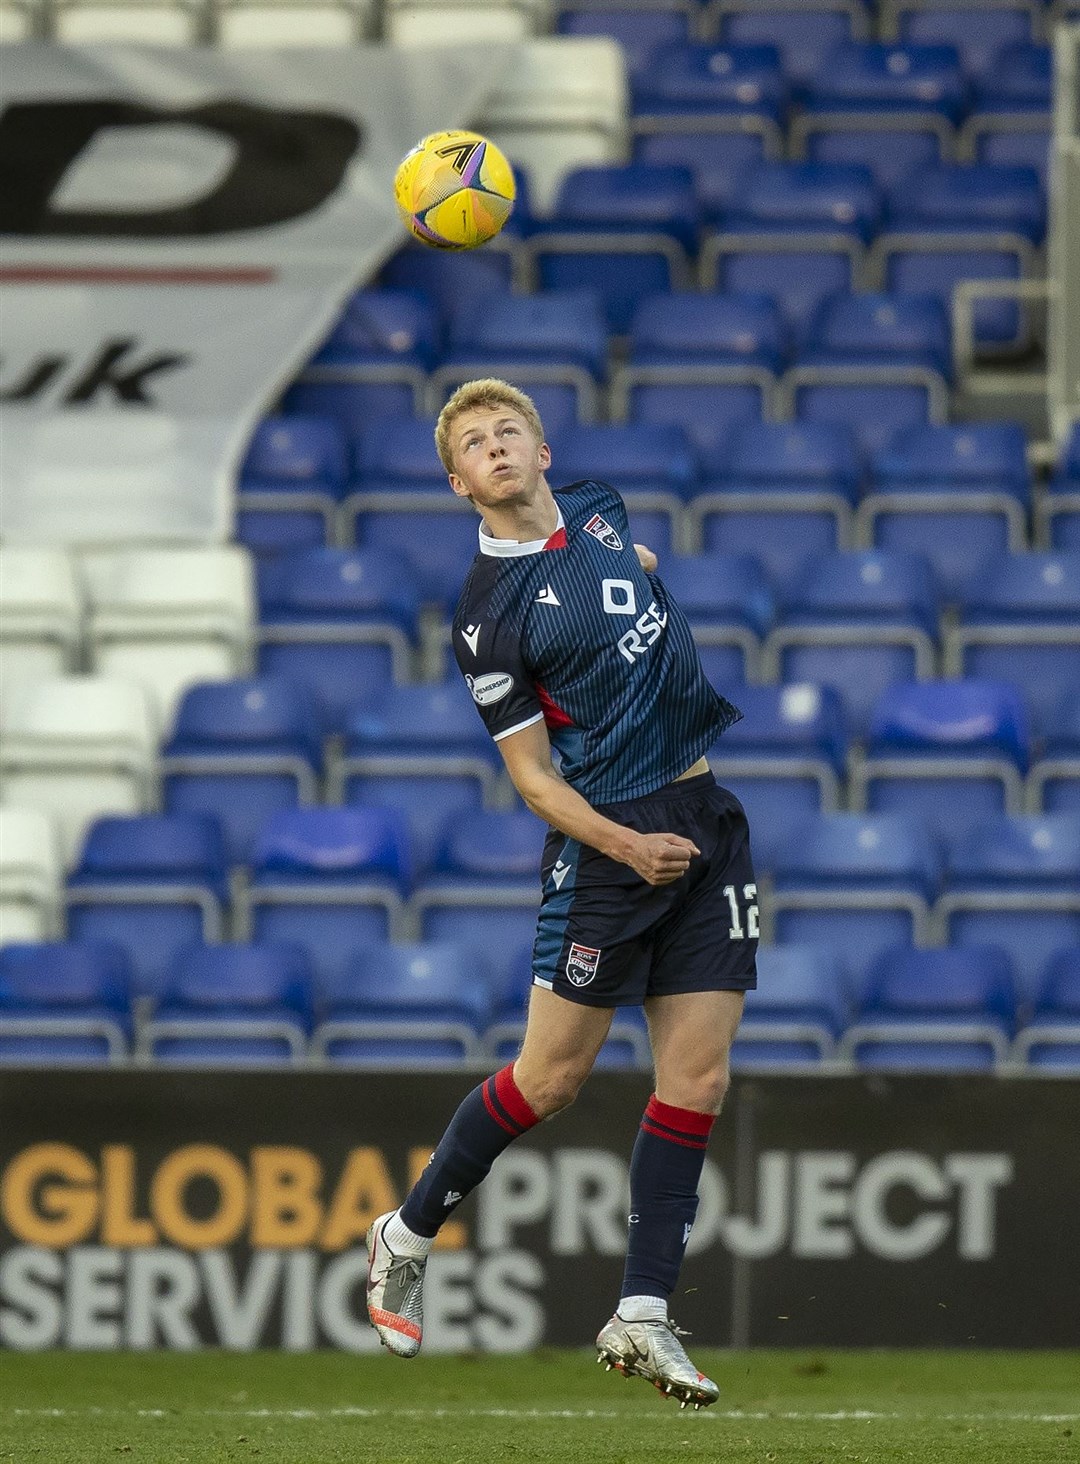 Picture - Ken Macpherson, Inverness. Ross County(0) v Hibs(0). 17.10.20. Ross County's Tom Grivosti made a welcome return from injury.